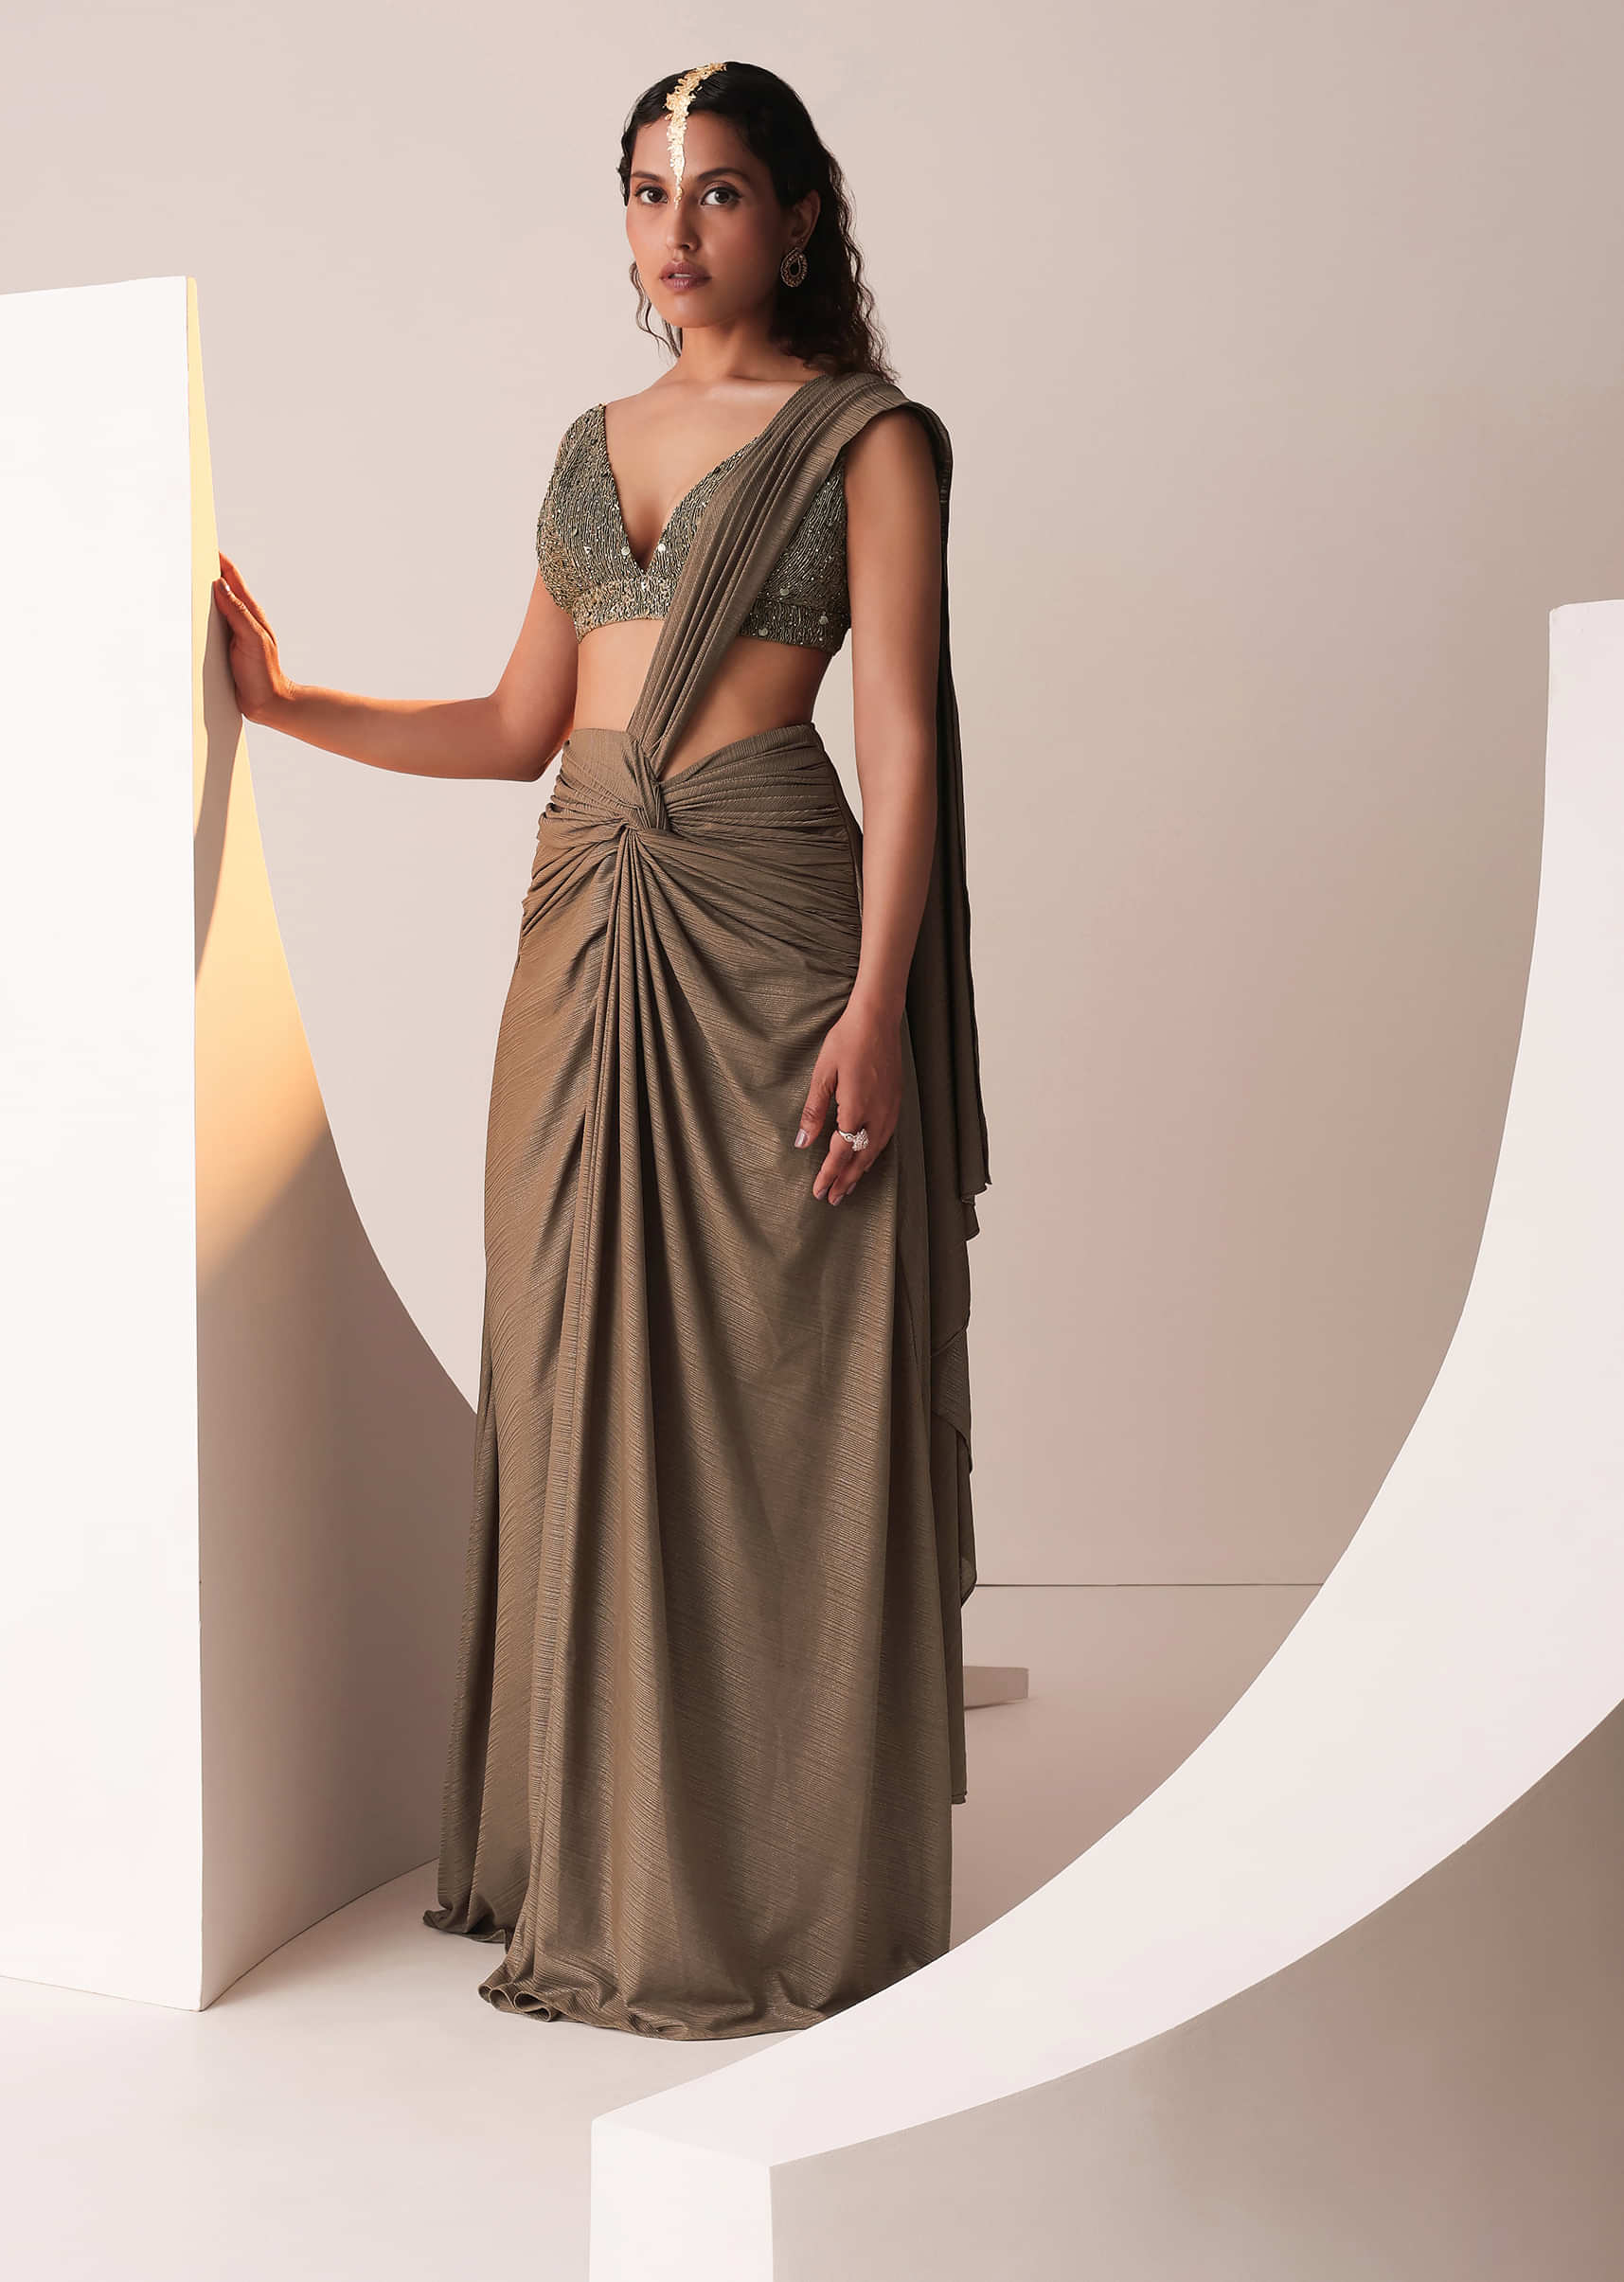 Mocha Brown Ready-To-Wear Saree With Embroidered Blouse In Knit Fabric And Pleated Satin